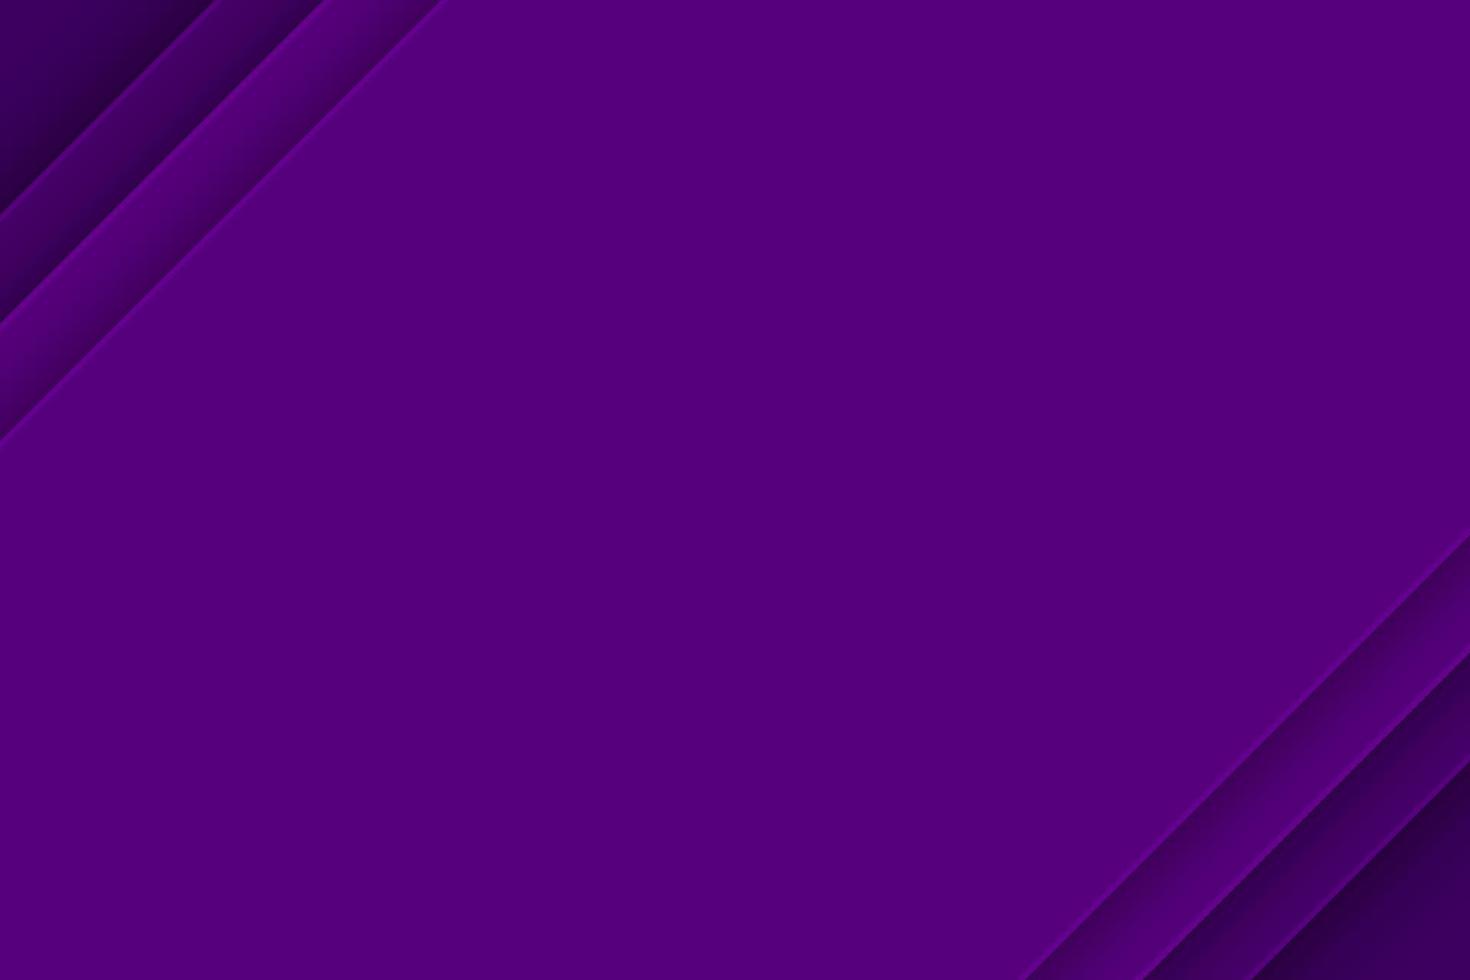 Realistic purple gradient abstract background. Backdrop with copy space for presentation, web design, banner or advertising Minimal modern trendy cool style graphic. Free Vector Design